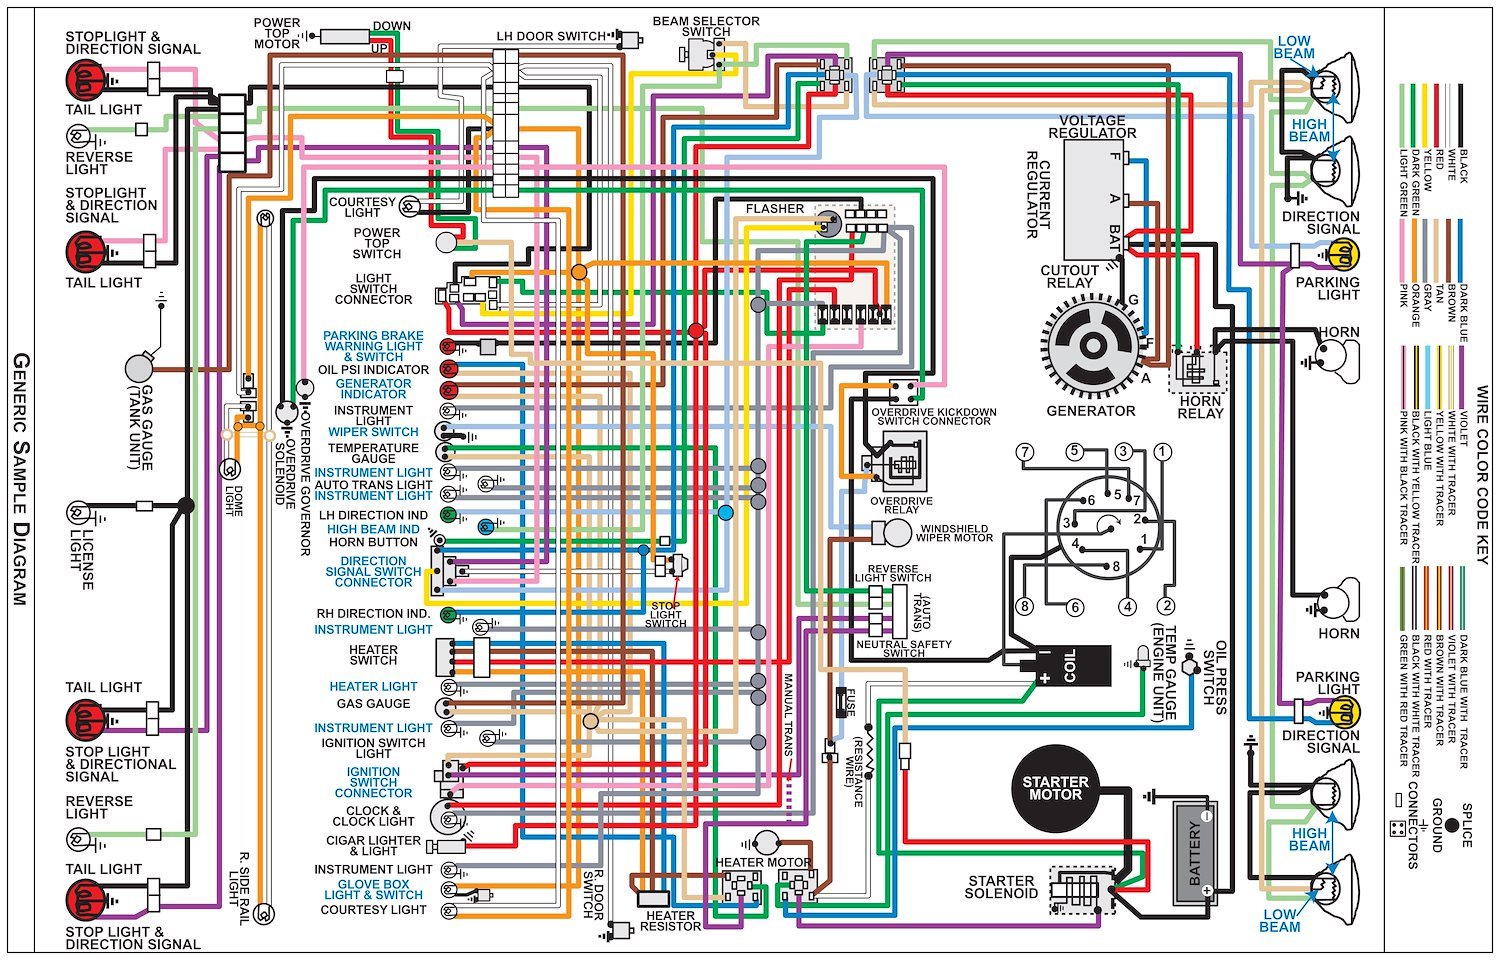 Wiring Diagram for 1937-1939 Lincoln with V12 Engines, 11 in x 17 in., Laminated